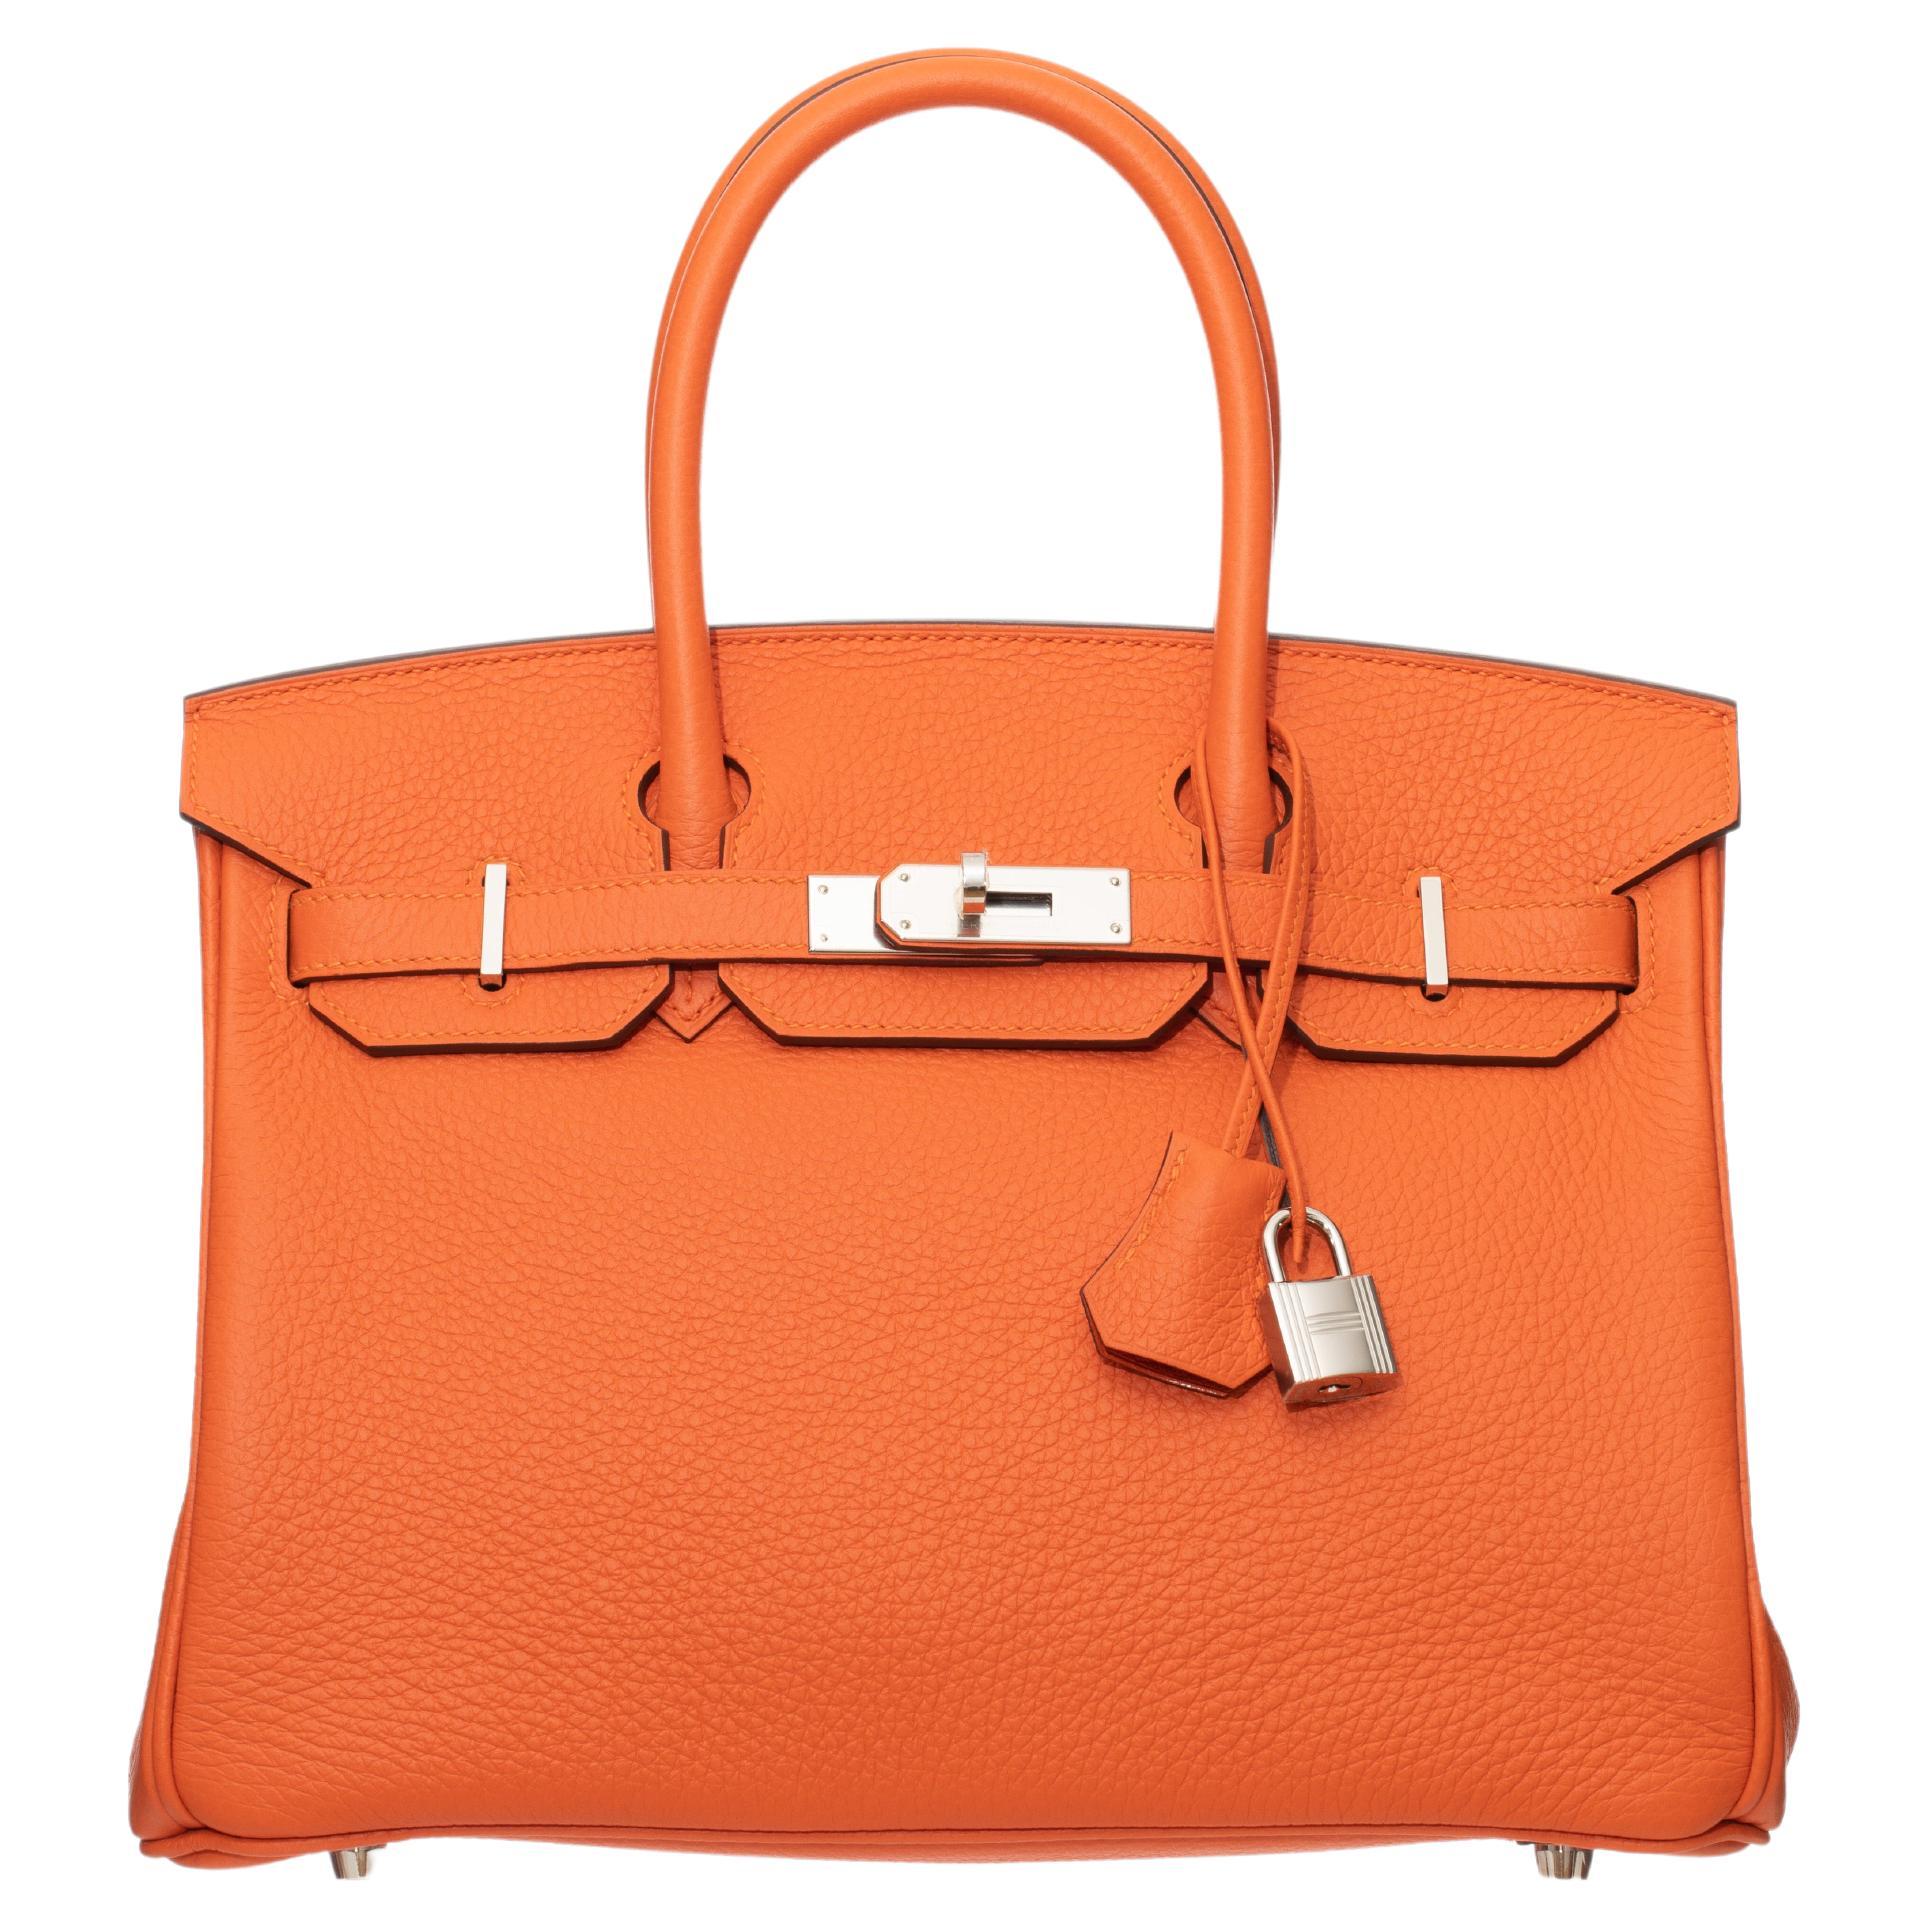 Brand: Hermès 
Style: Birkin Retourne
Size: 30cm
Color: Feu
Leather: Togo
Hardware: Palladium
Year: 2021 Z

Condition: Pristine, never carried: The item has never been carried and is in pristine condition complete with all accessories.

Accompanied